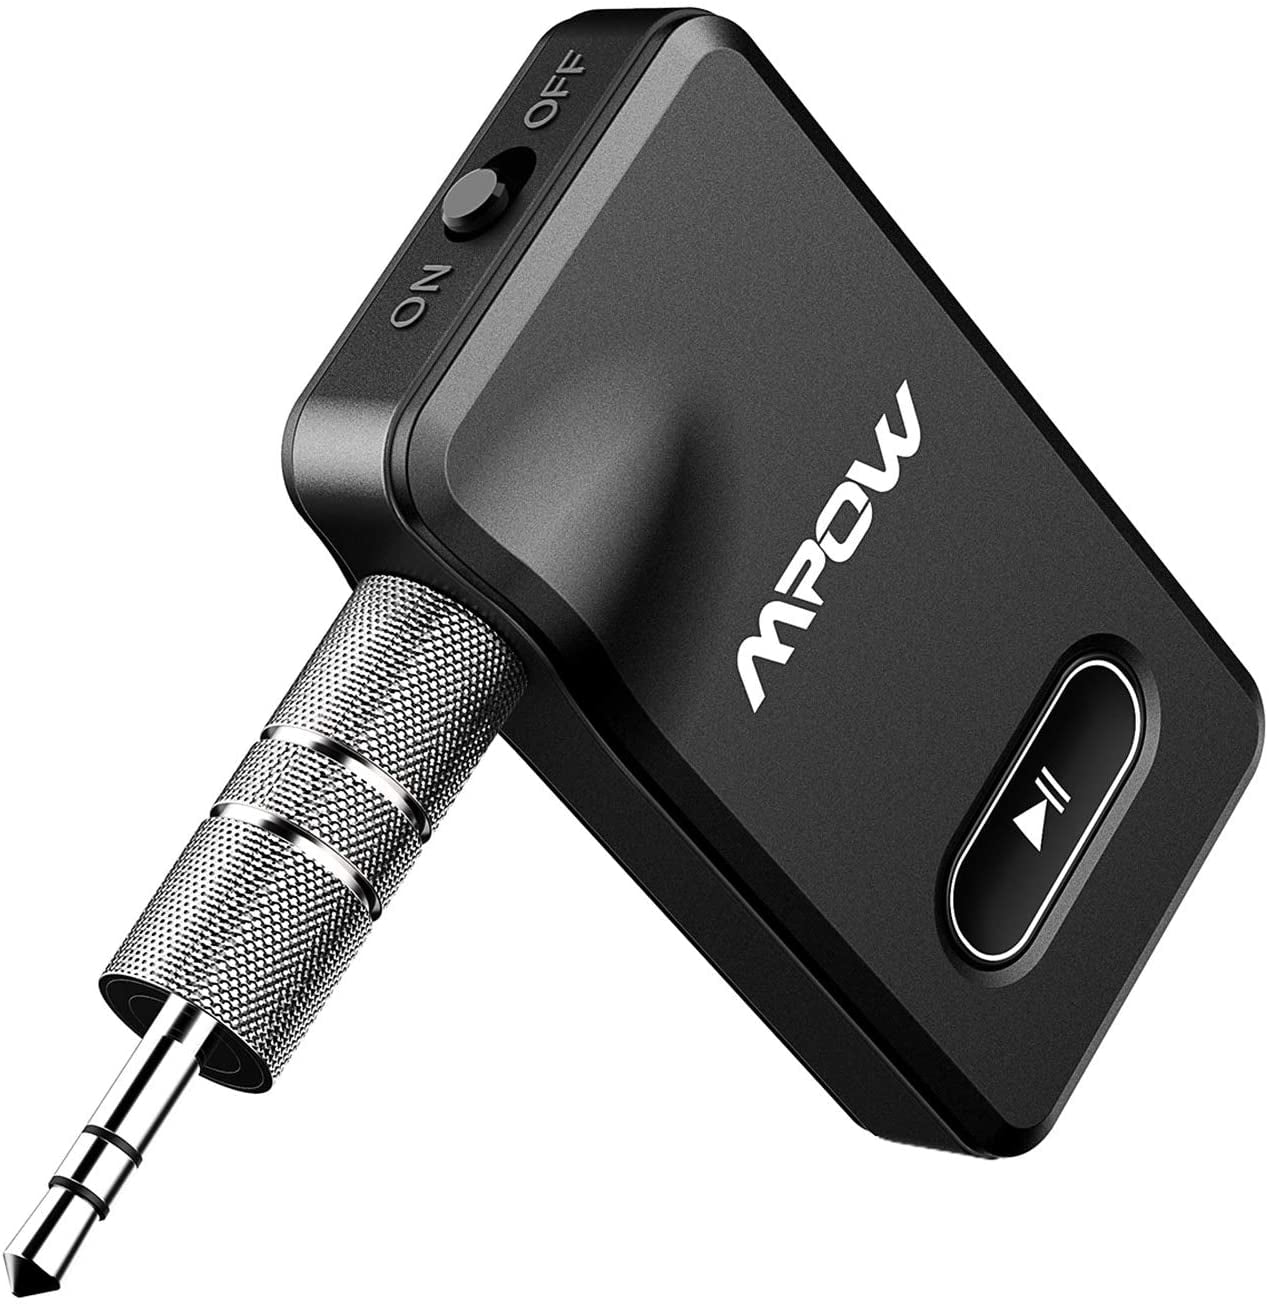 Mpow Wireless Bluetooth Audio Receiver Car Kit 3.5mm Stereo Music Sound Adapters 